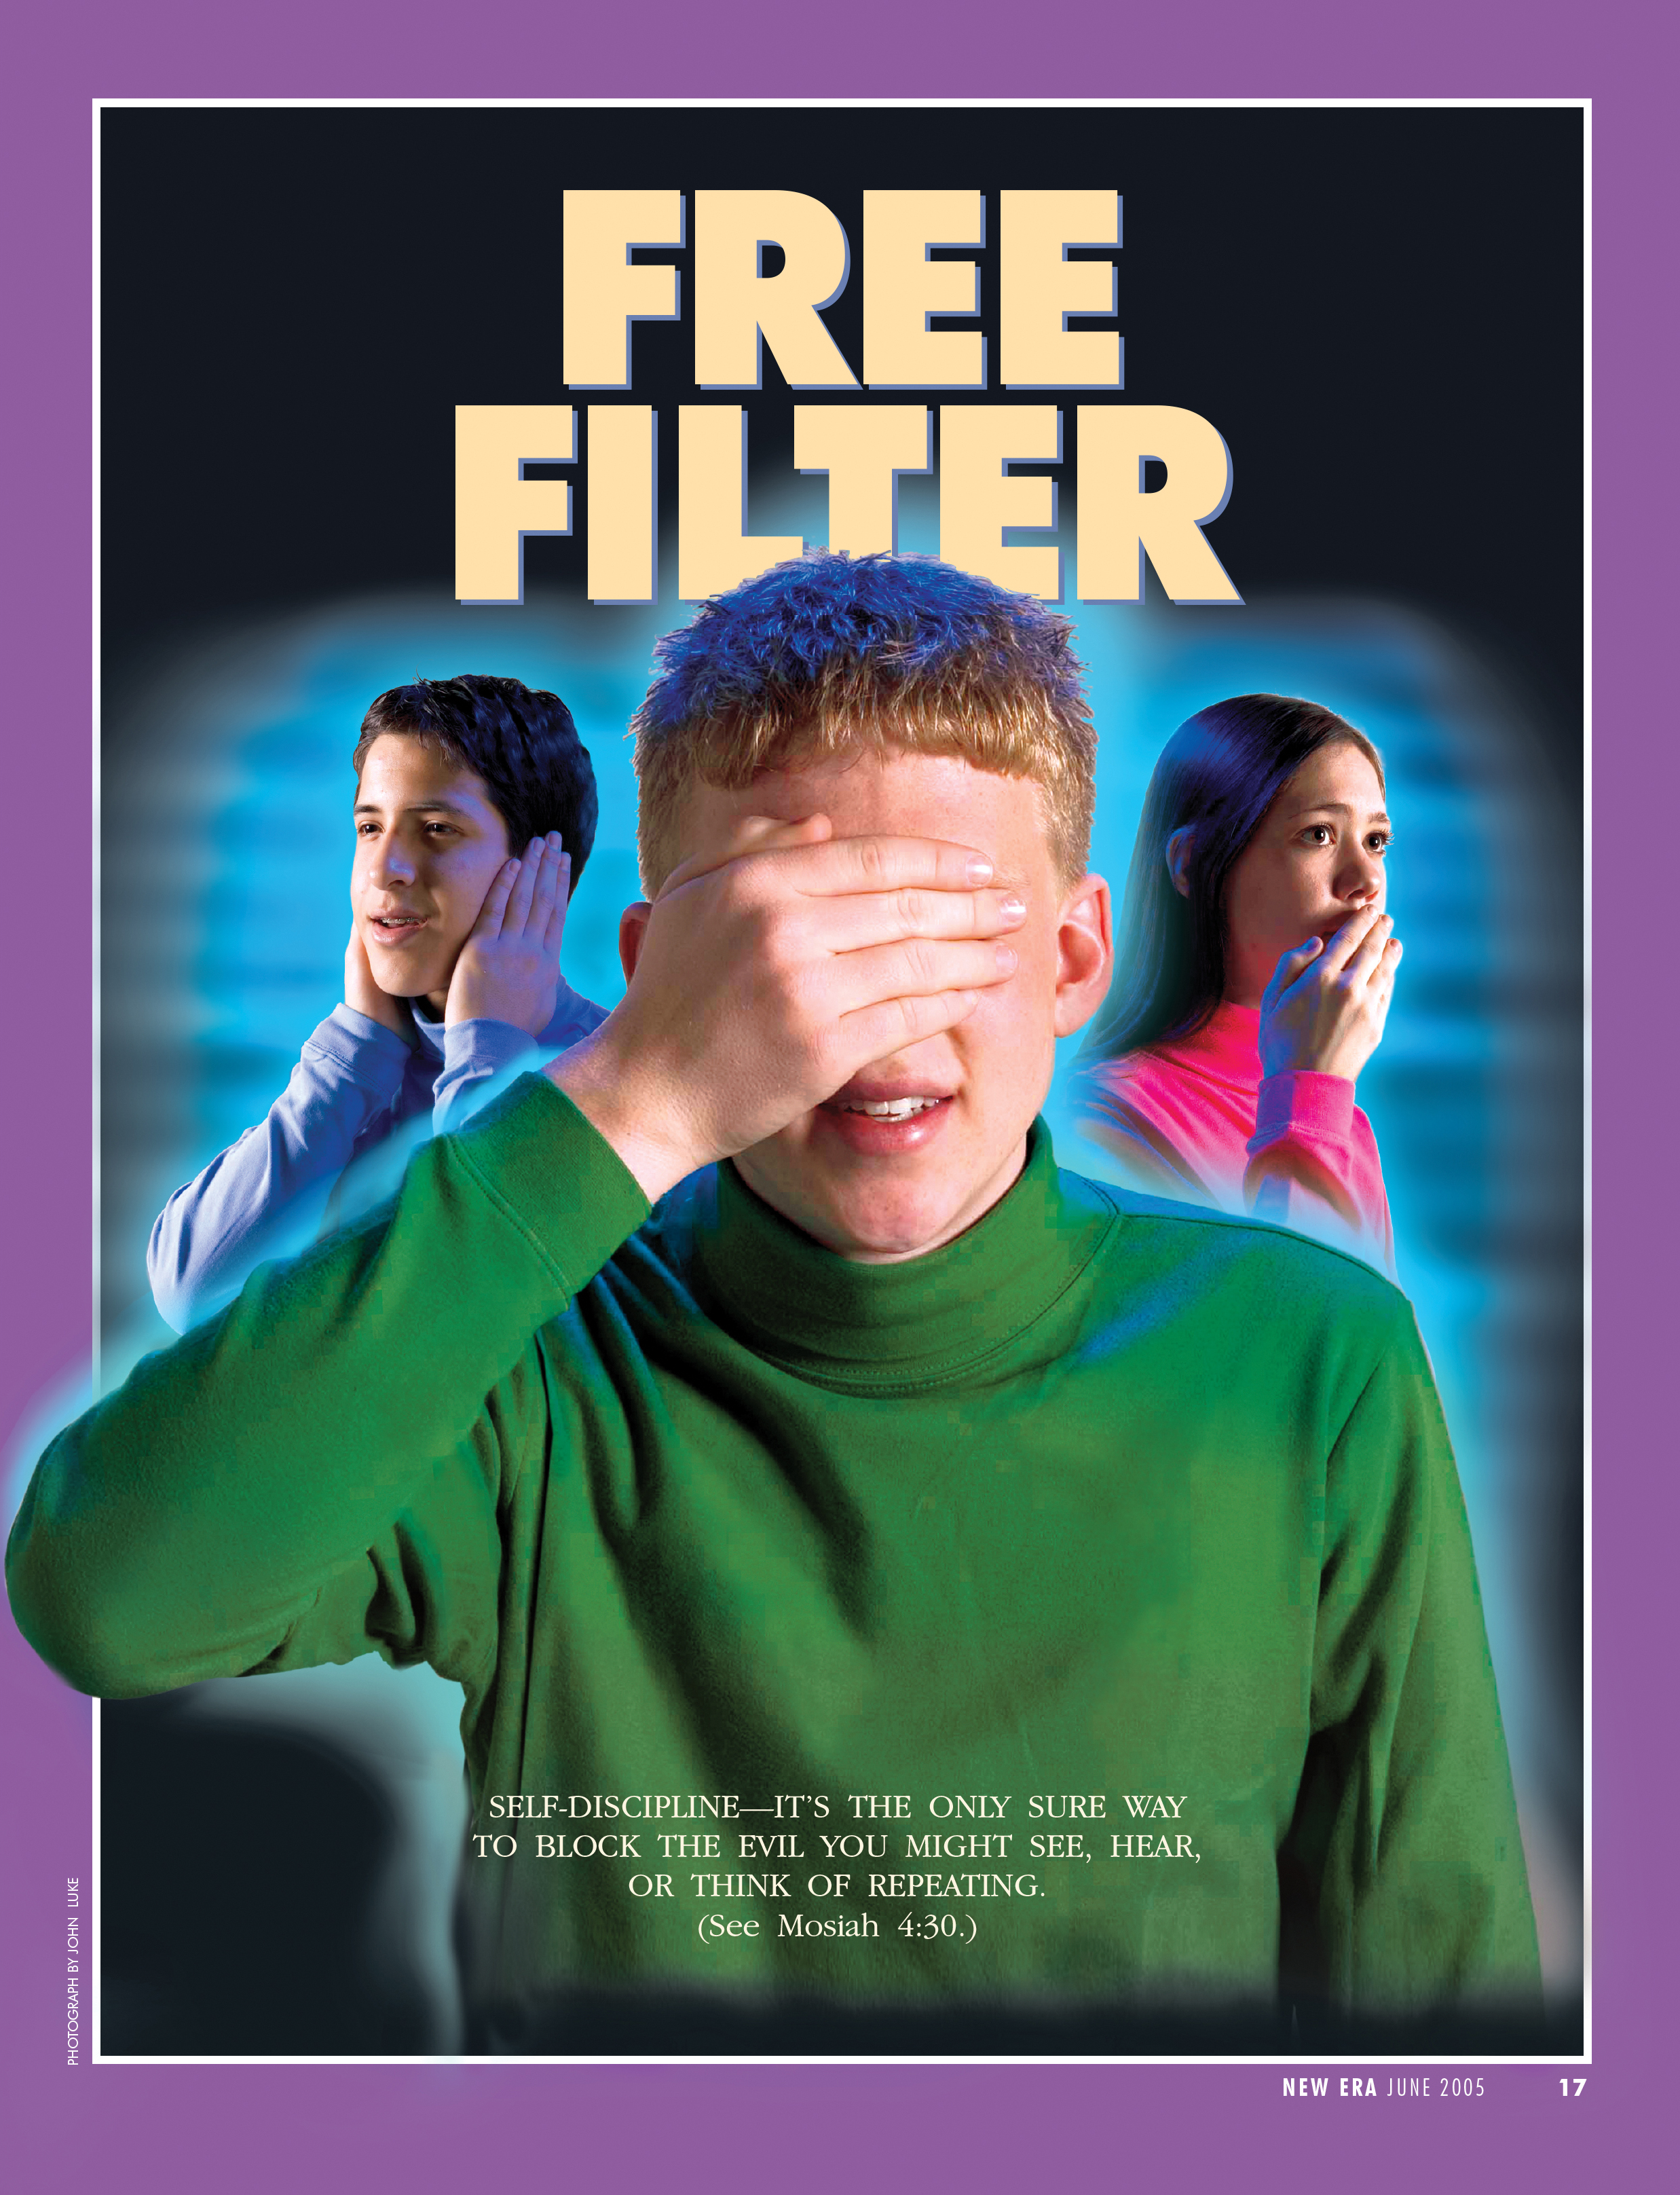 A conceptual photograph showing three youth covering their eyes, ears, and mouth, paired with the words “Free Filter.”